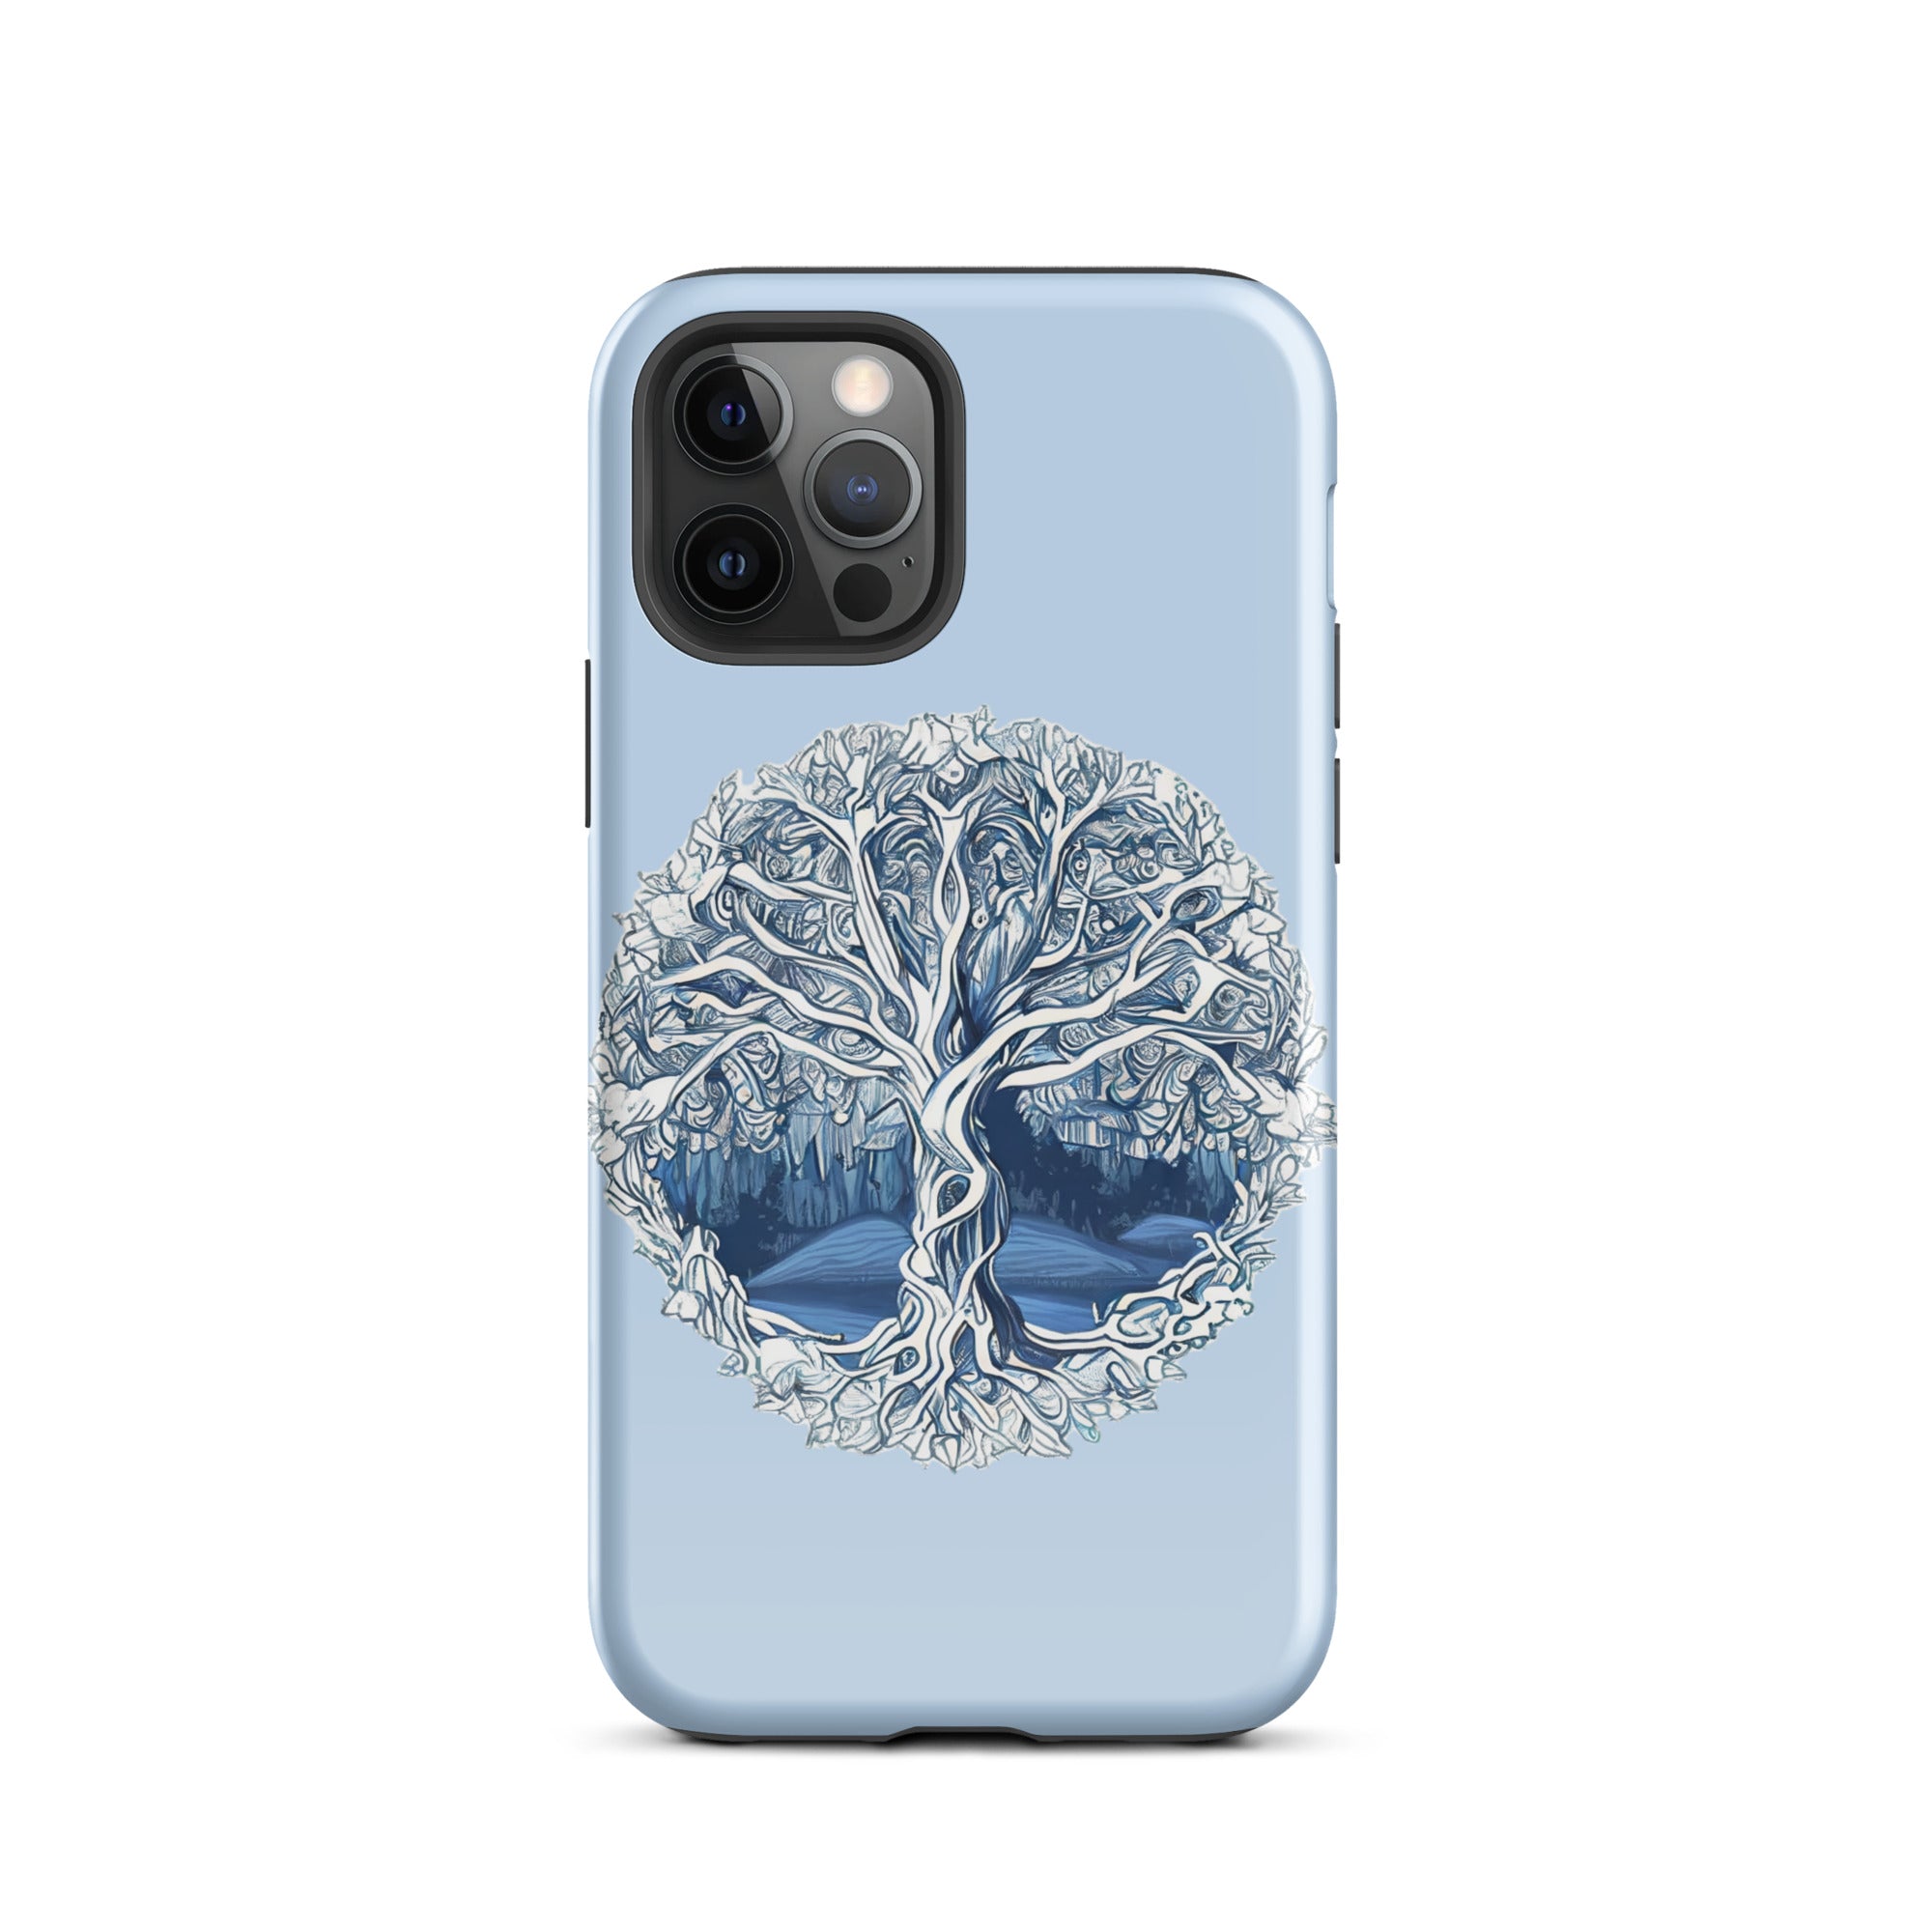 tough-case-for-iphone-glossy-iphone-12-pro-front-656e0a3712b87.jpg